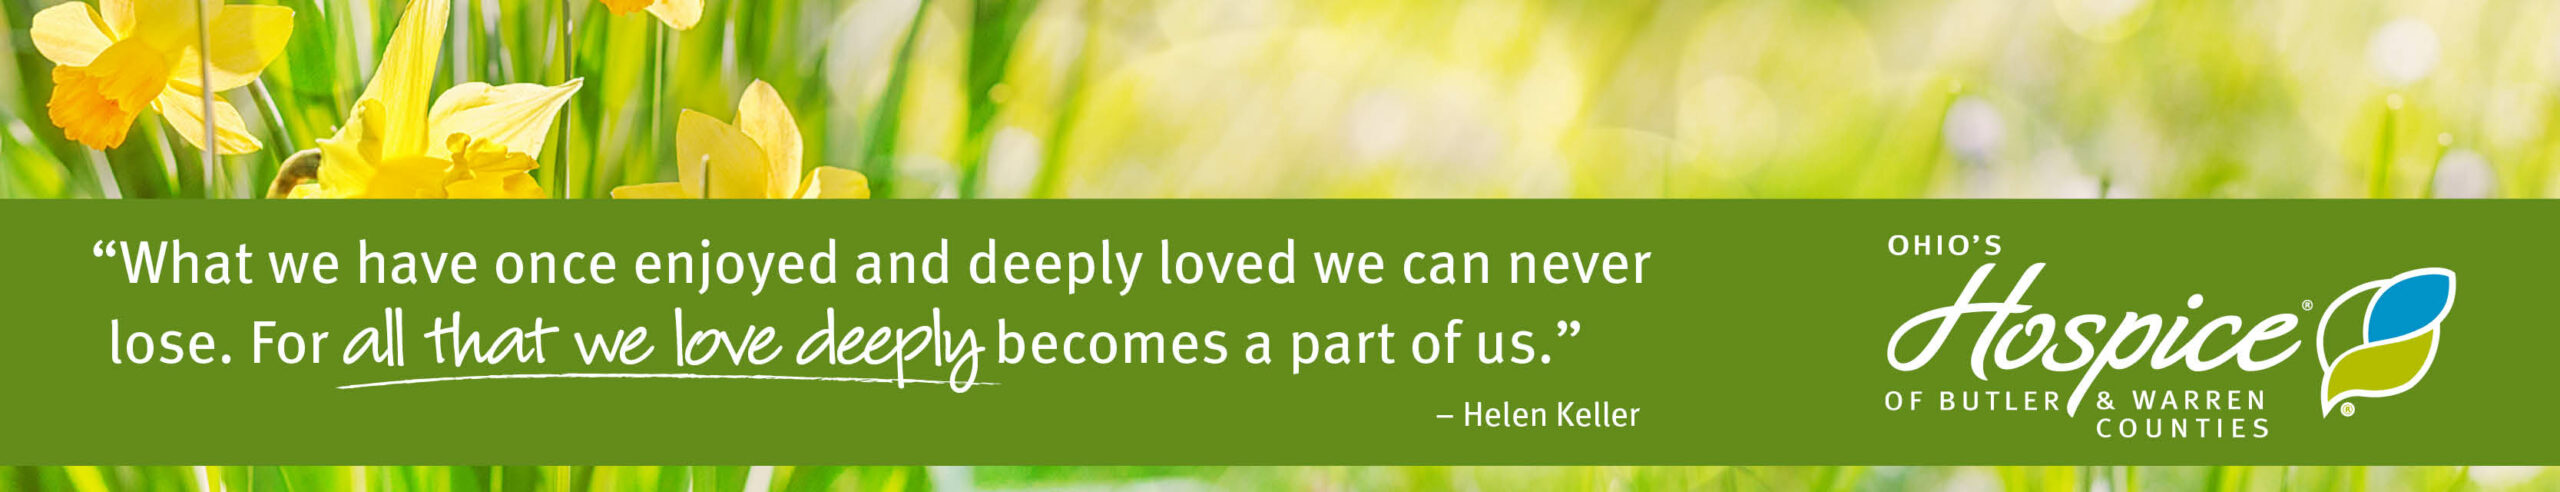 "What we have once enjoyed and deeply loved we can never lose. For all that we love deeply becomes a part of us." - Helen Keller Ohio's Hospice of Butler & Warren Counties